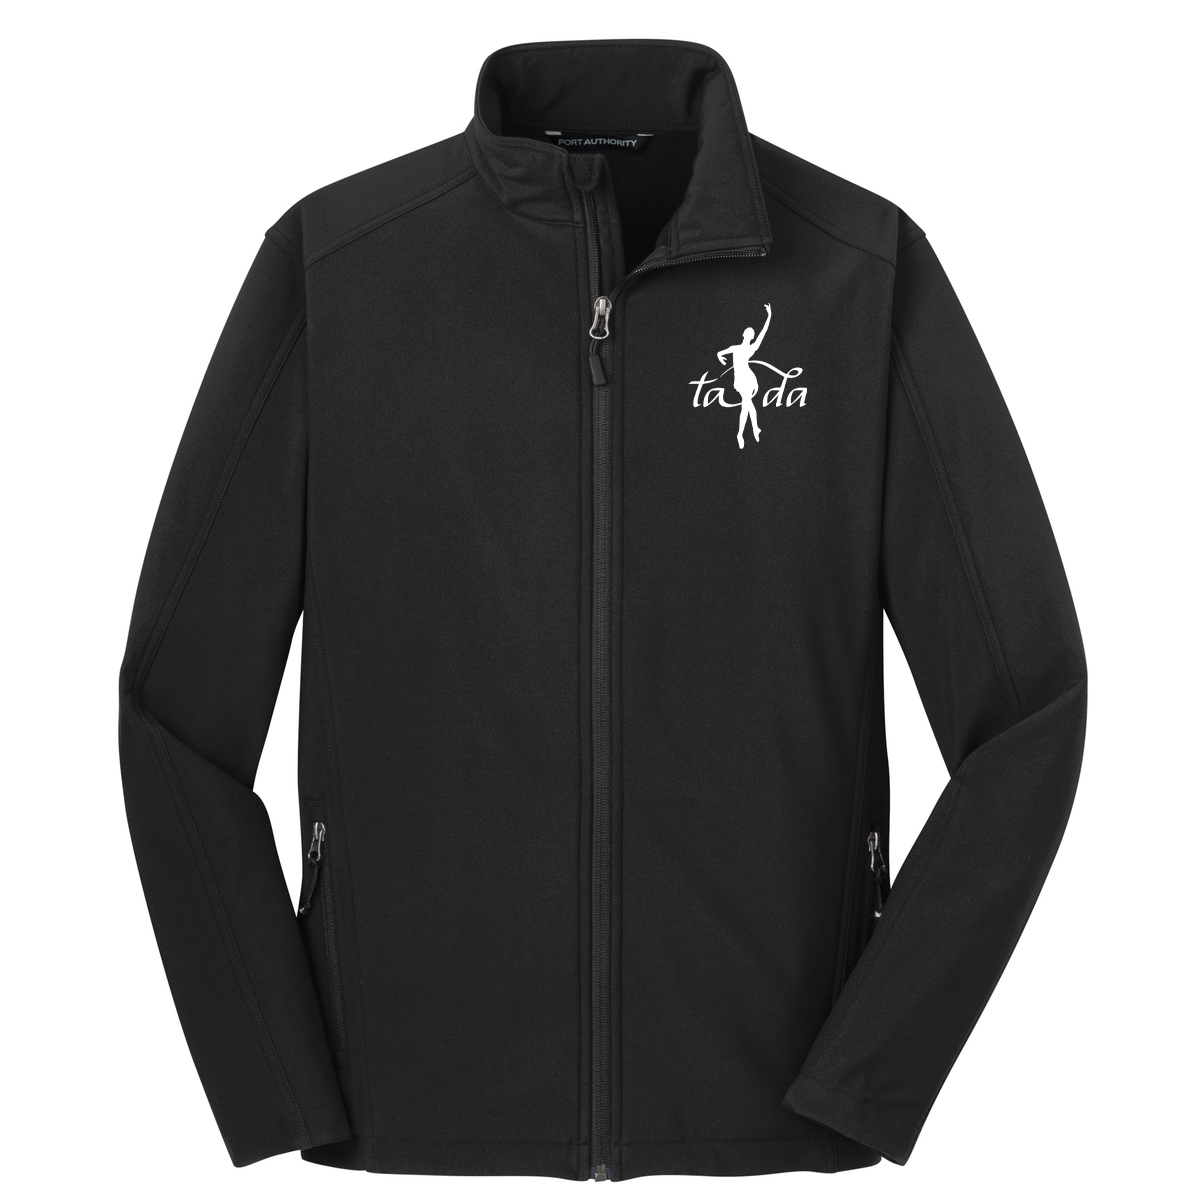 The Academy of Dance Anatomy Tall Core Soft Shell Jacket